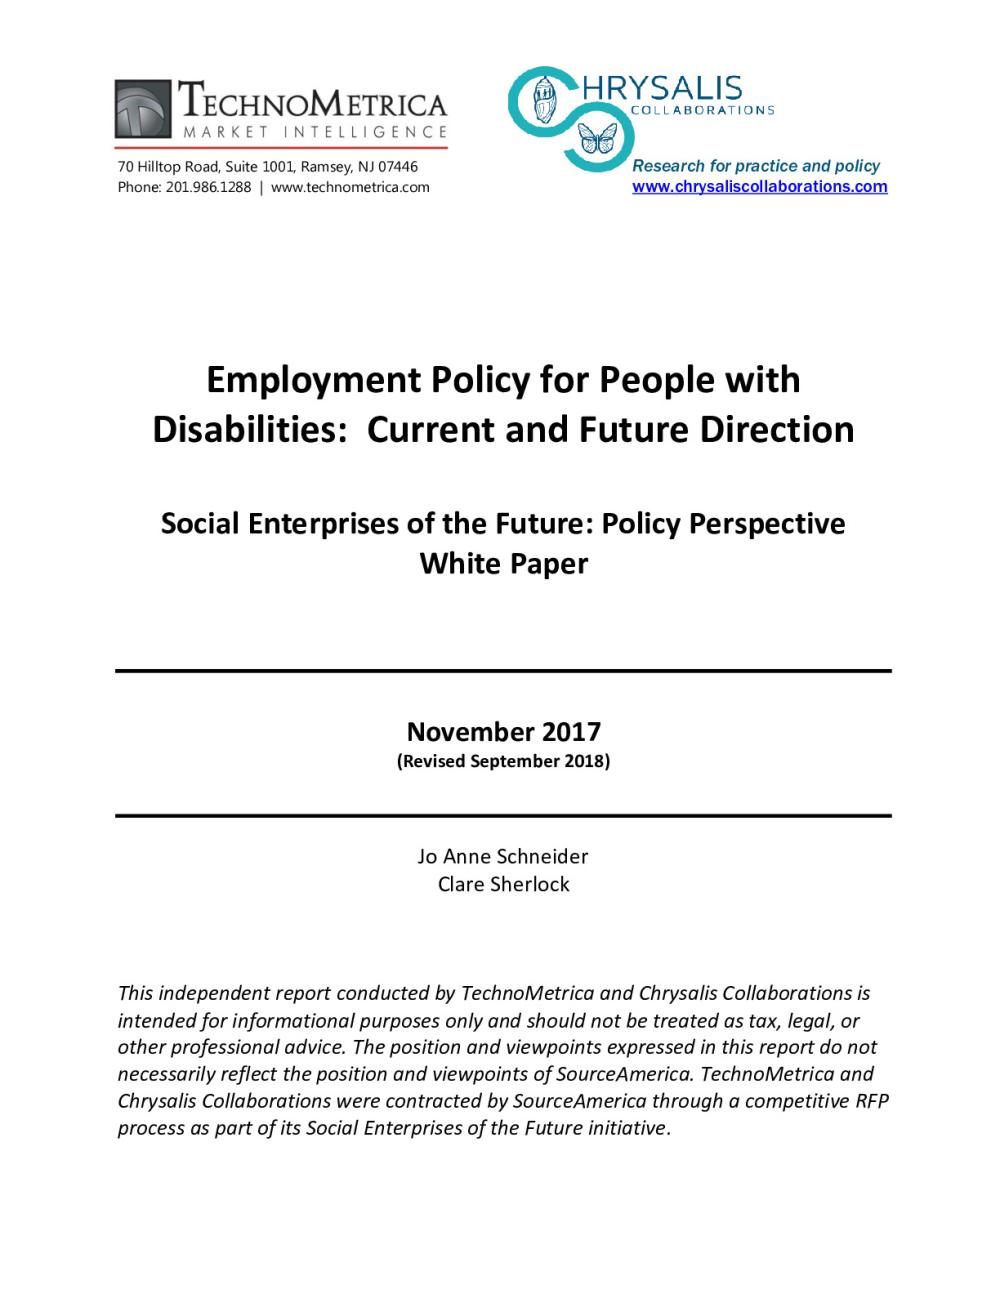 Employment Policy for People with Disabilities: Current and Future Direction